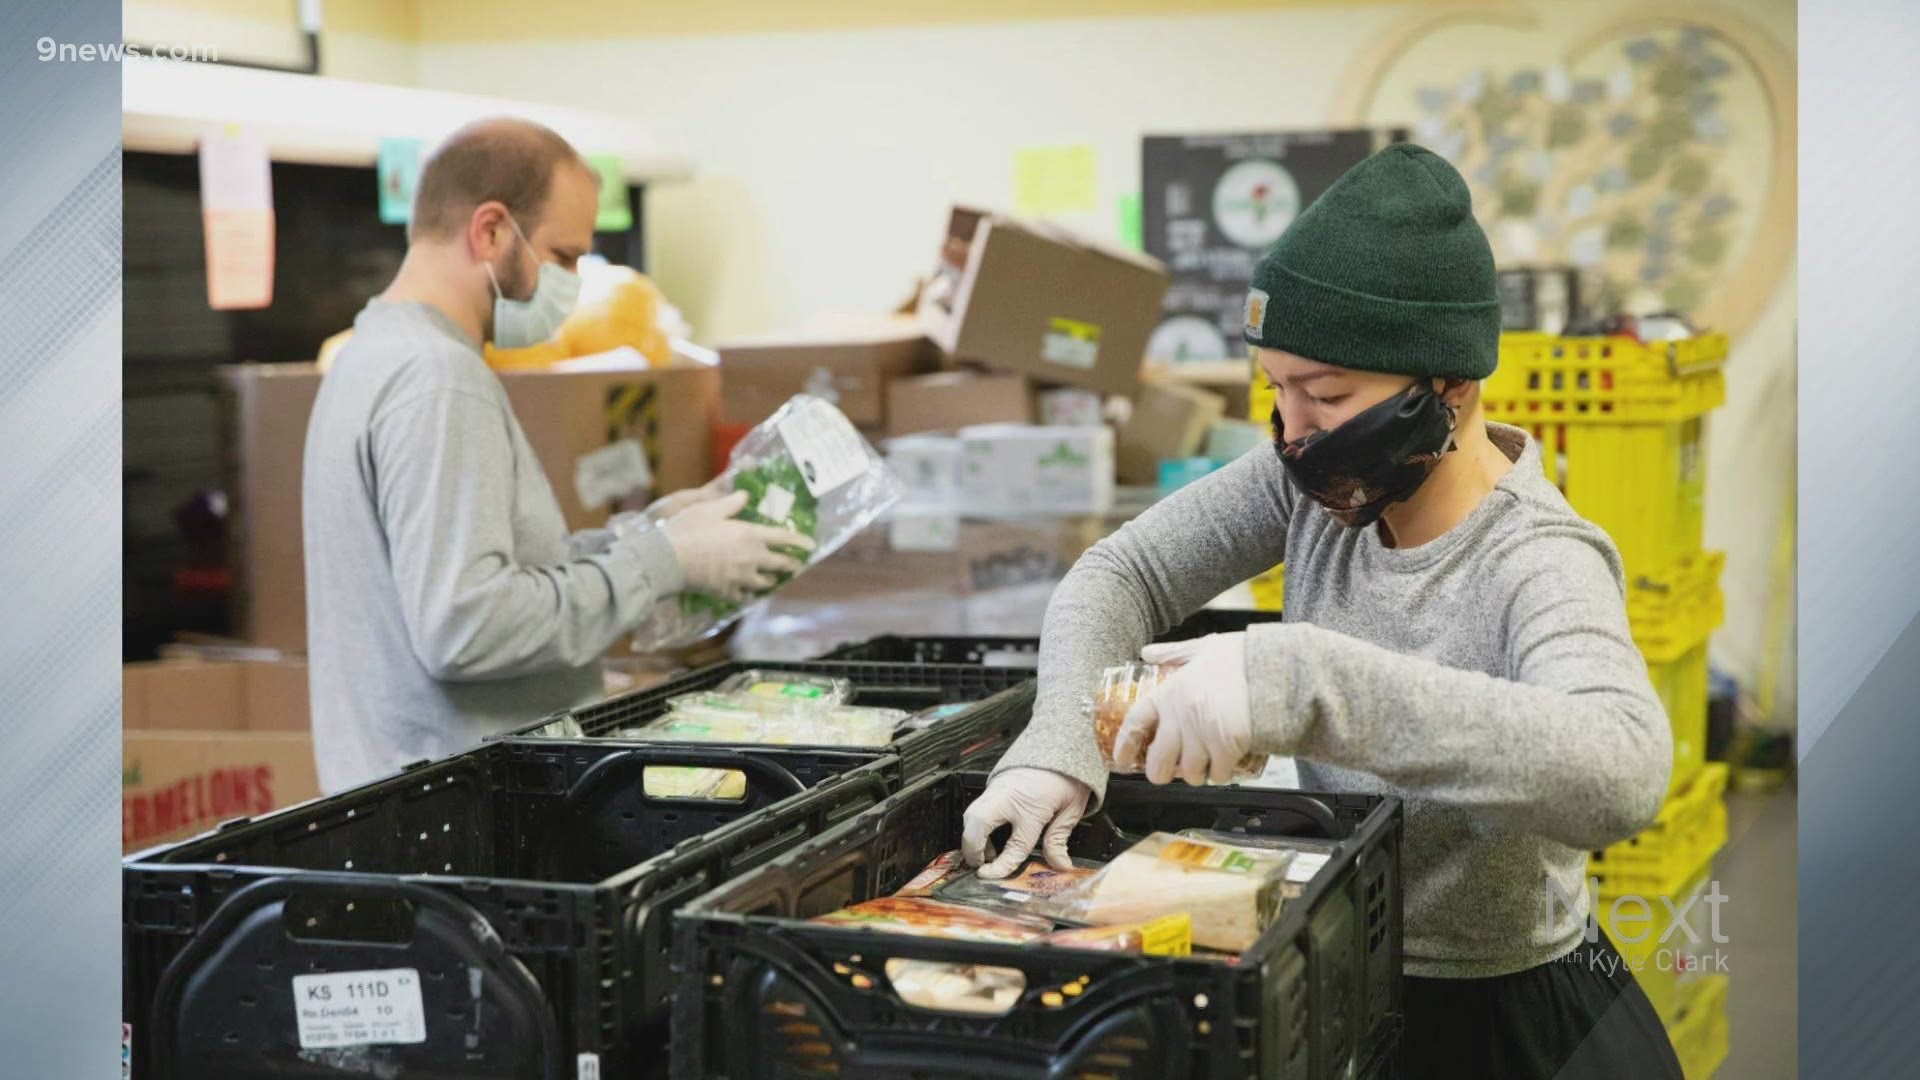 We addressed hunger in rural Colorado last week. This week's Word of Thanks focuses on hunger around Denver. Metro Caring feeds our neighbors and addresses poverty.